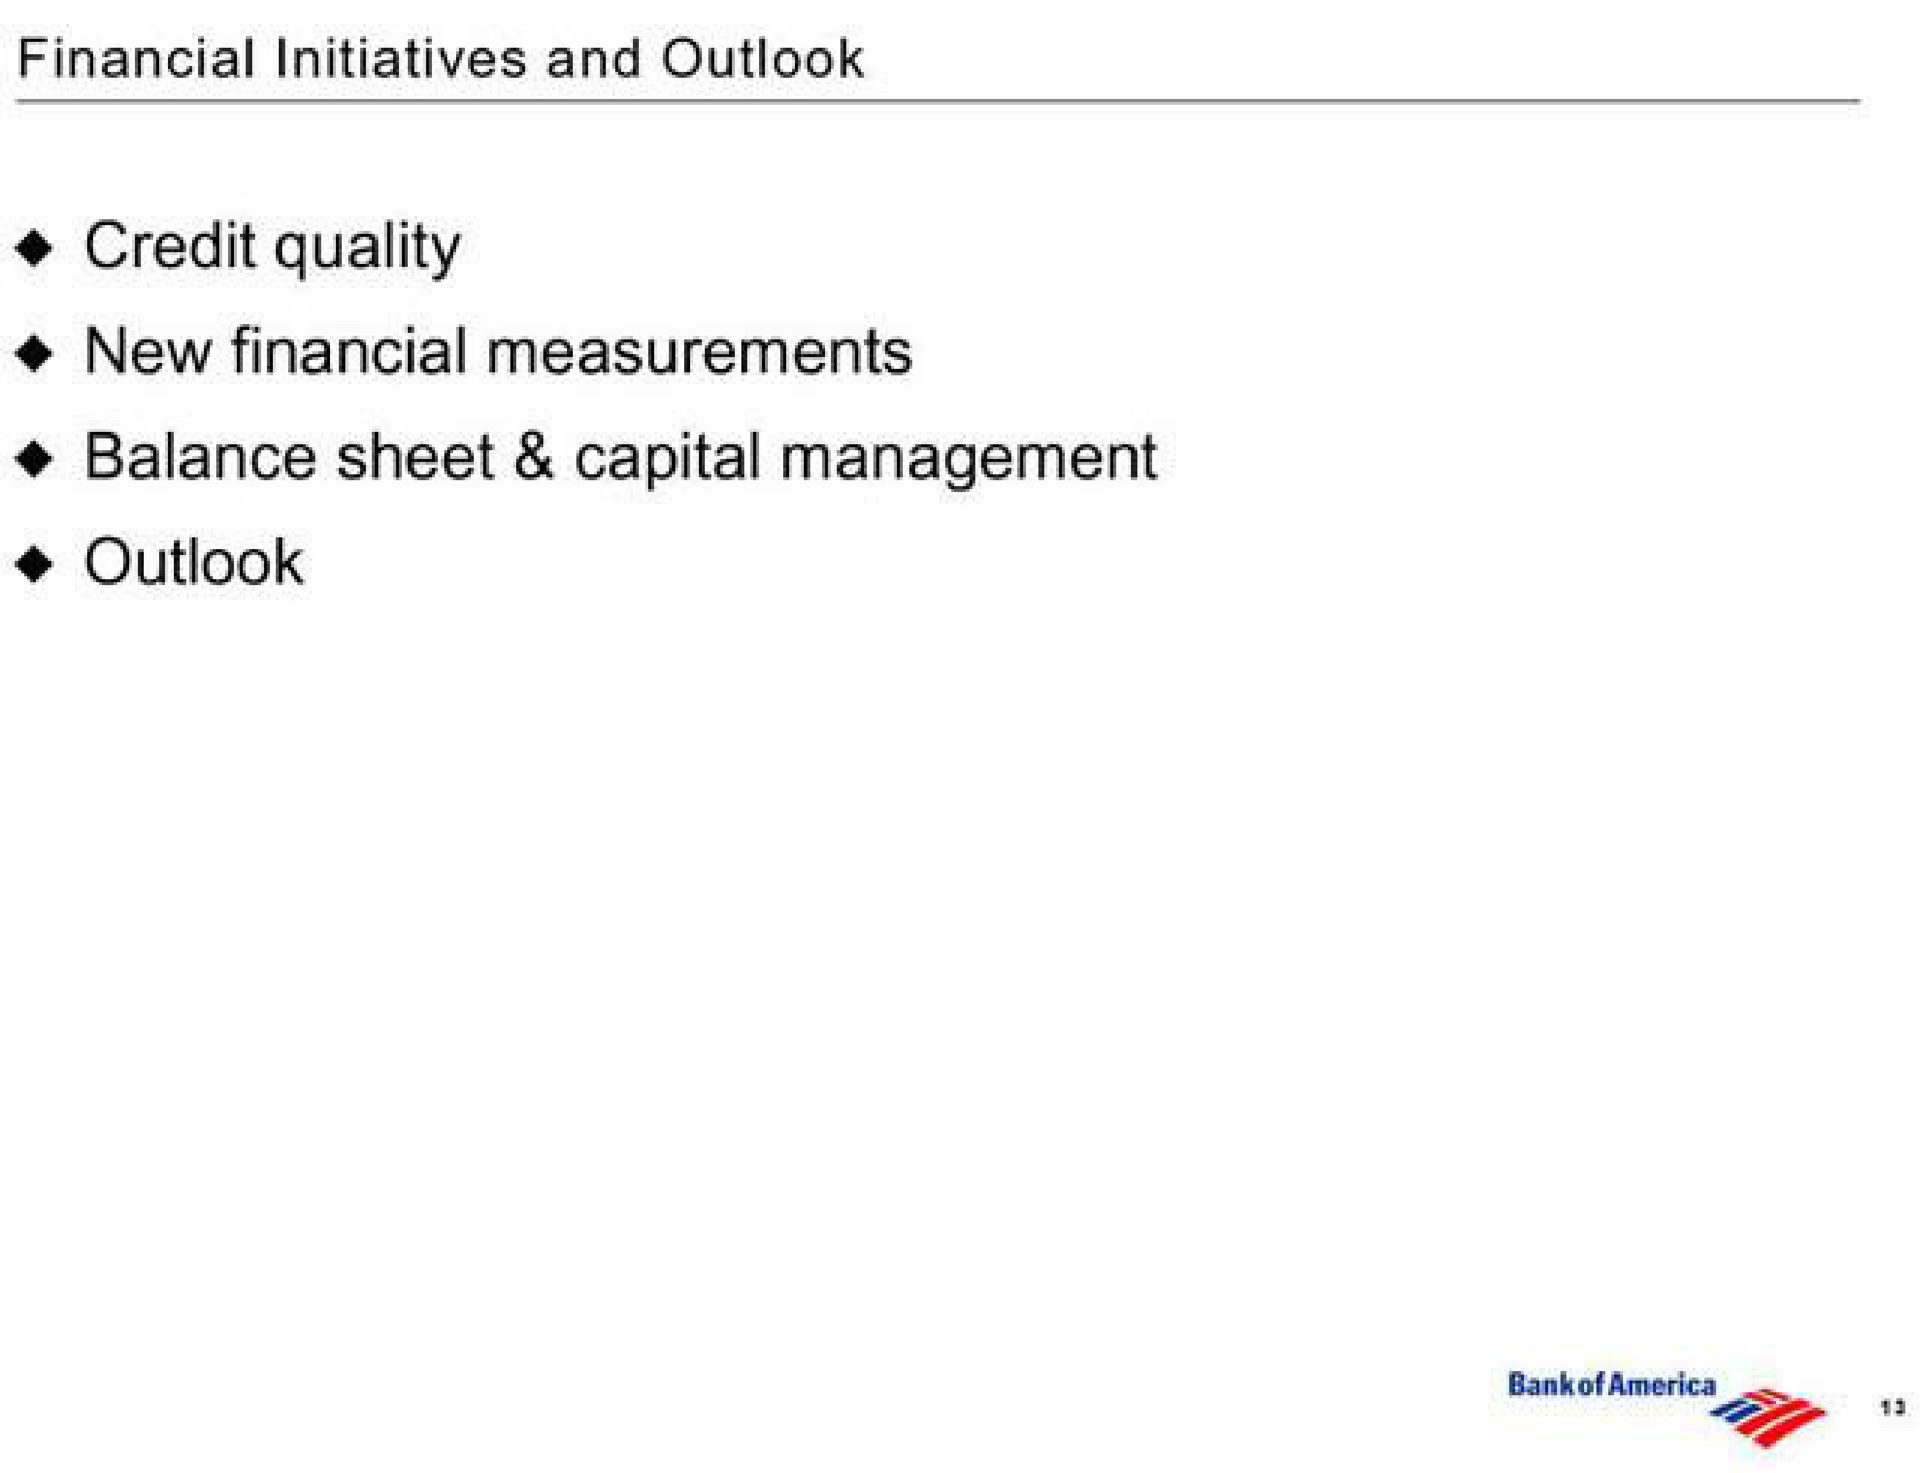 financial initiatives and outlook credit quality new financial measurements balance sheet capital management outlook | Bank of America